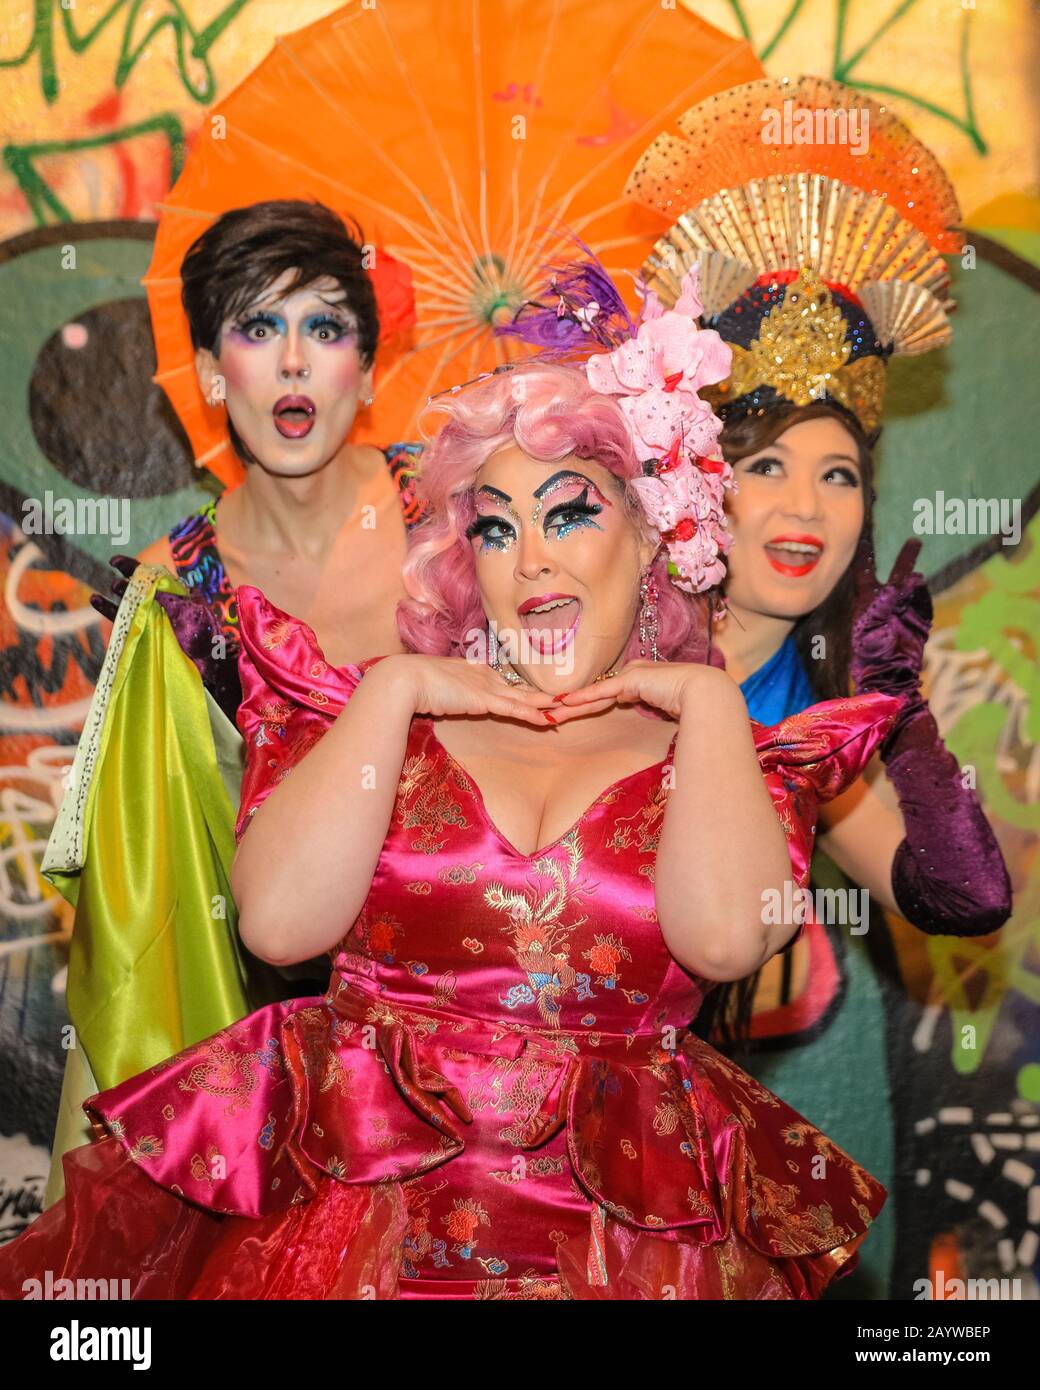 Waterloo, London, 17th Feb 2020. Drag collective Bitten Peach (ShayShay with umbrella, Lilly Snatchdragon in pink dress and wig, and Evelyn Carnate, in blue top) go underground in the graffiti-clad tunnels in Waterloo to celebrate London's VAULT Festival. The festival has returned for its eighth year with eight weeks of the best new theatre and comedy, immersive experiences, cabaret, live performance and late-night parties. VAULT Festival runs until March 22nd. Credit: Imageplotter/Alamy Live News Stock Photo